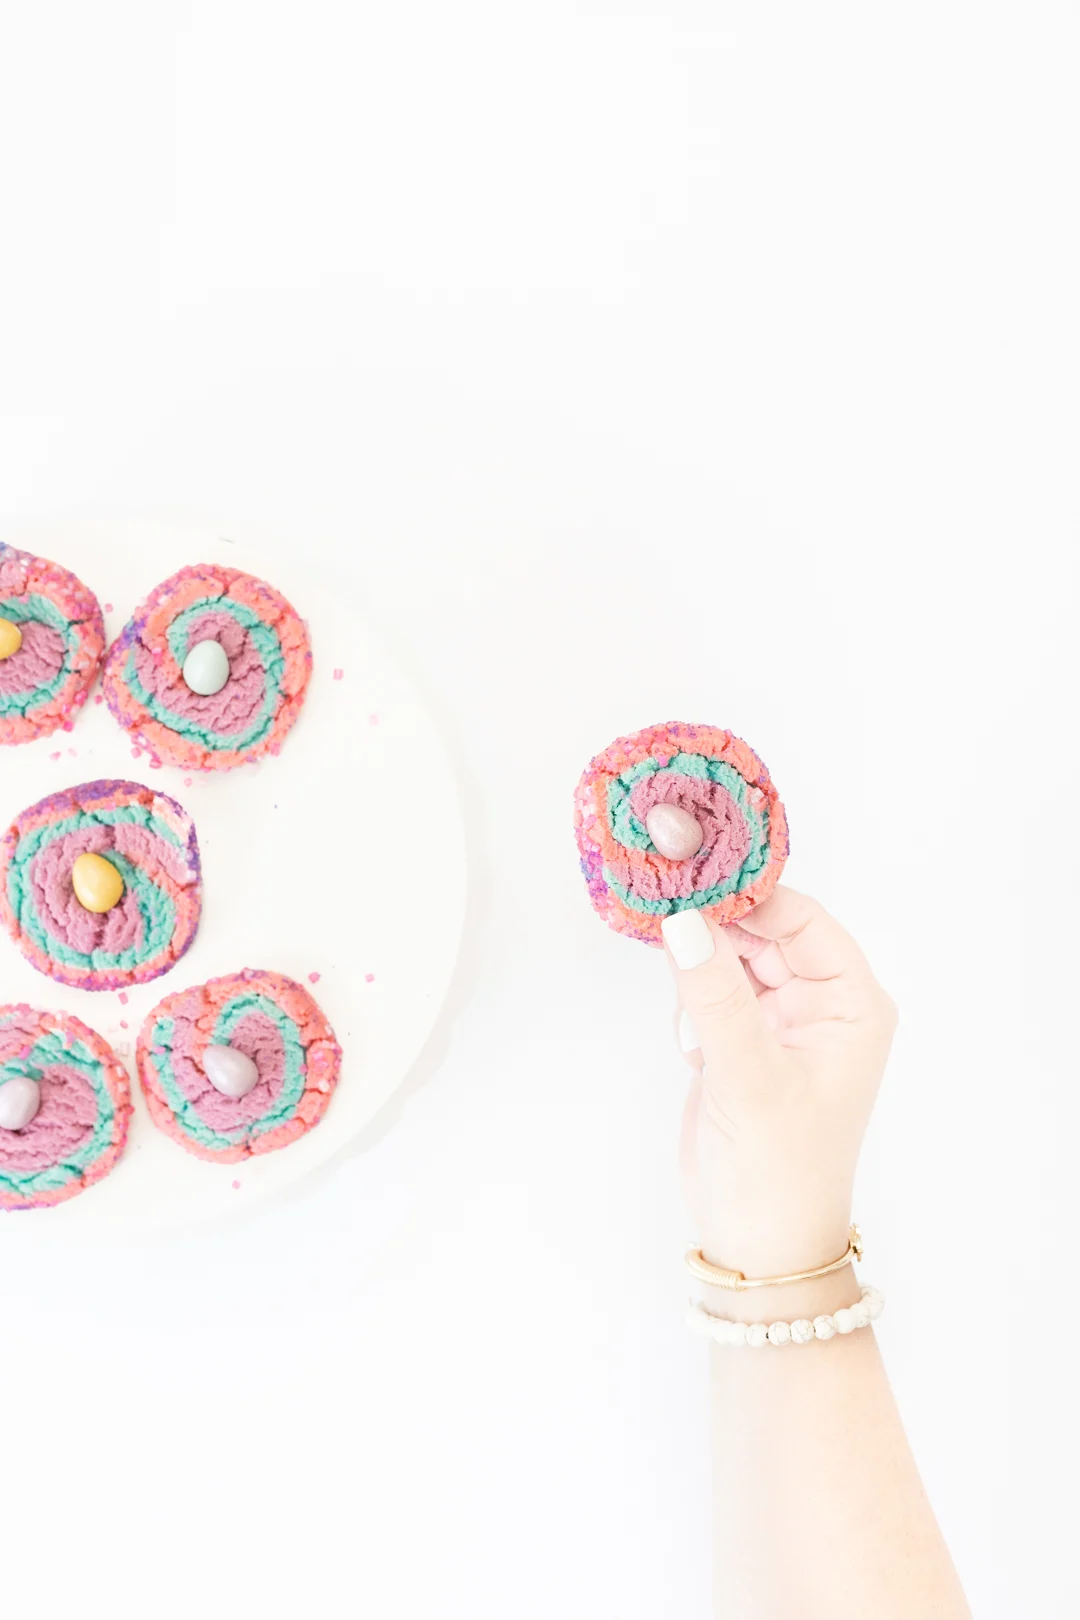 pastel swirled cookies for easter